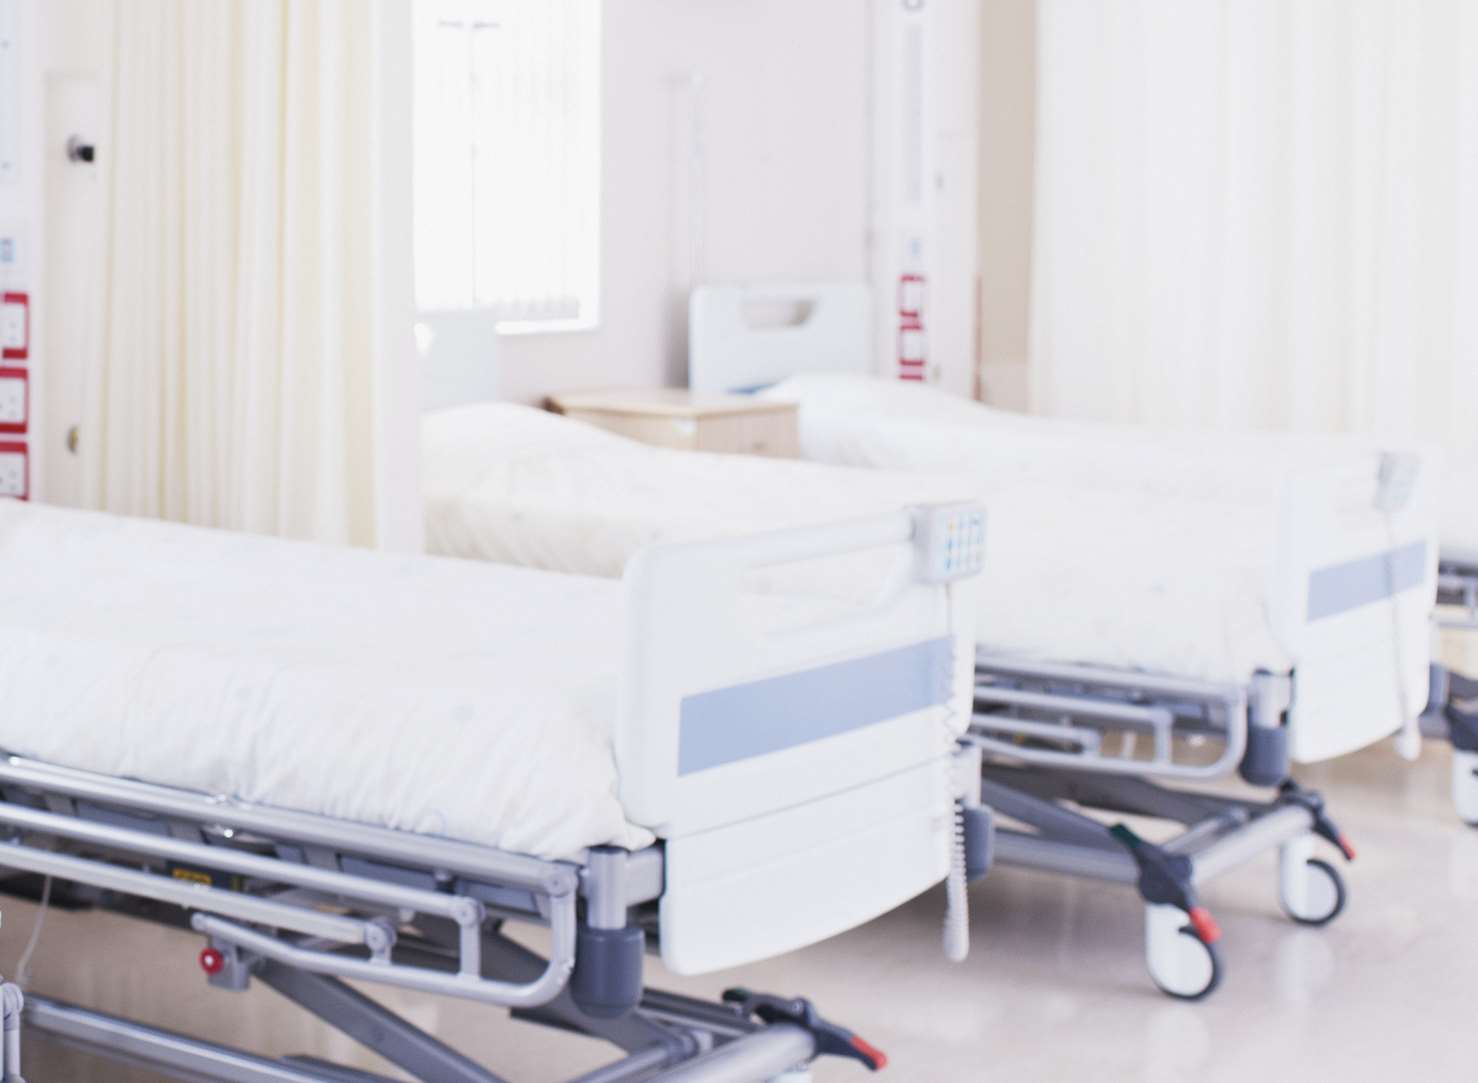 Patients are forced to stay in hospital longer than necessary. Library image.